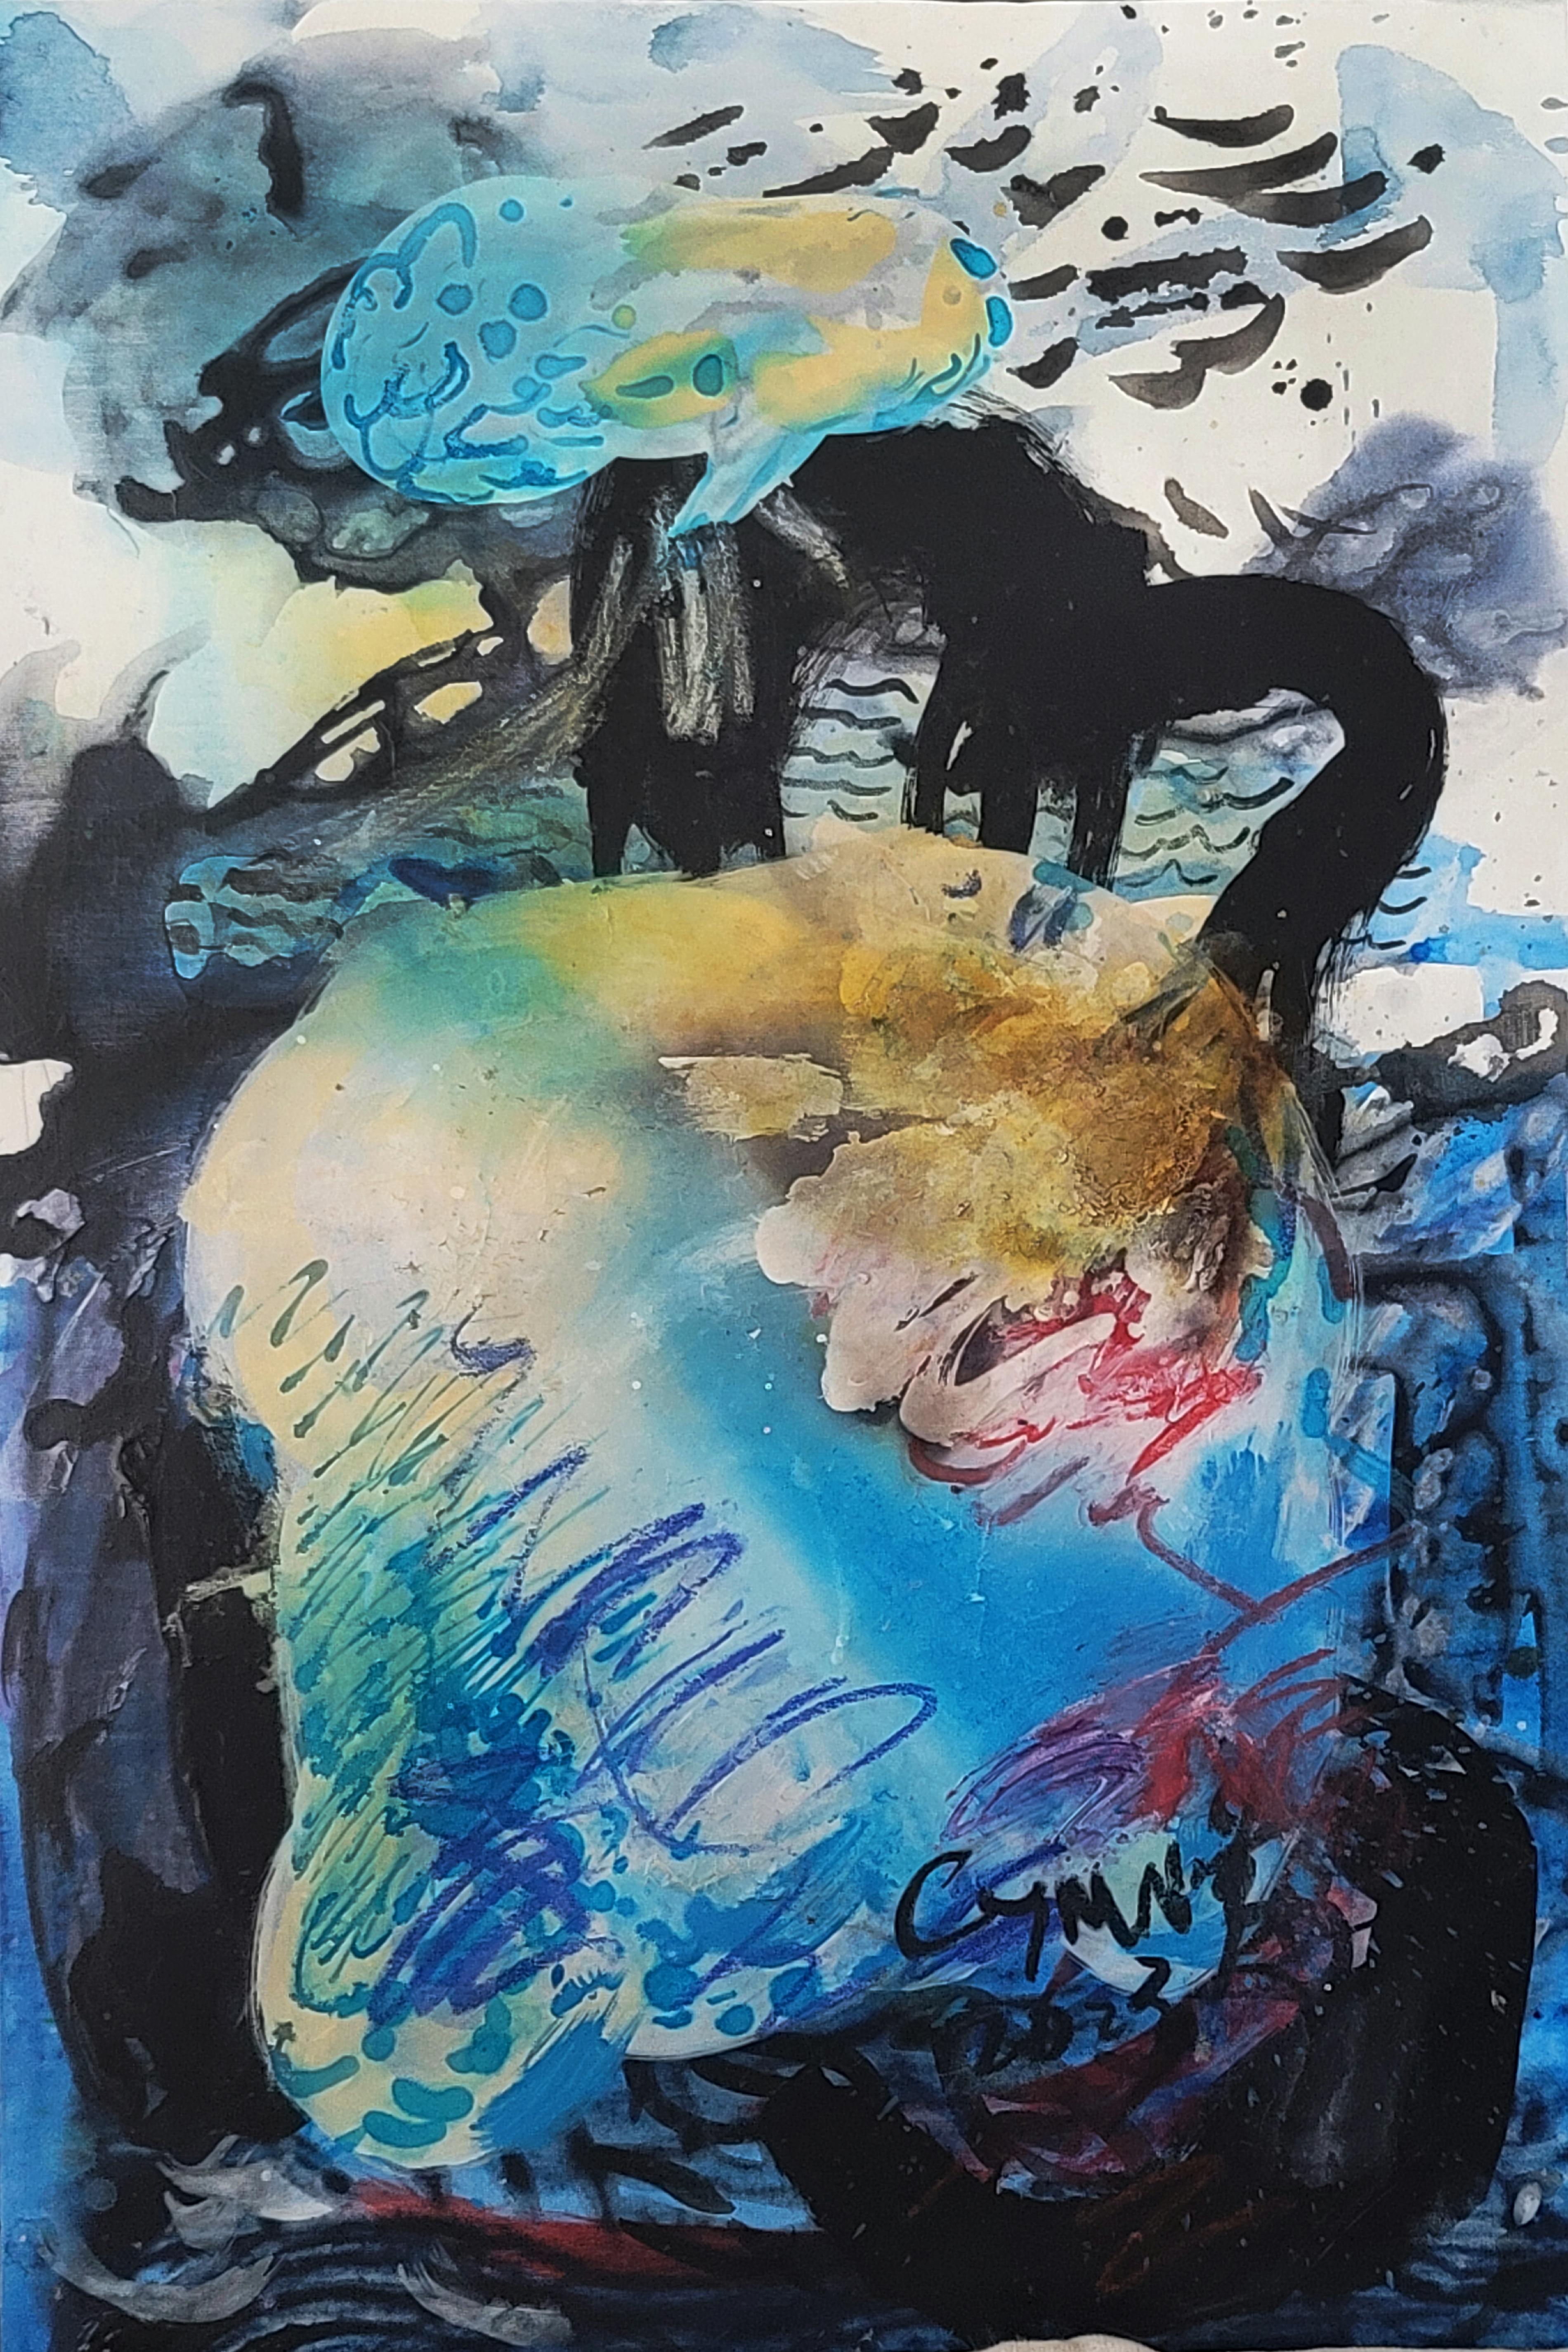 Emergence III - Raw Power, Expressive Abstract, Zen Calligraphy - Painting by Cymn Wong 